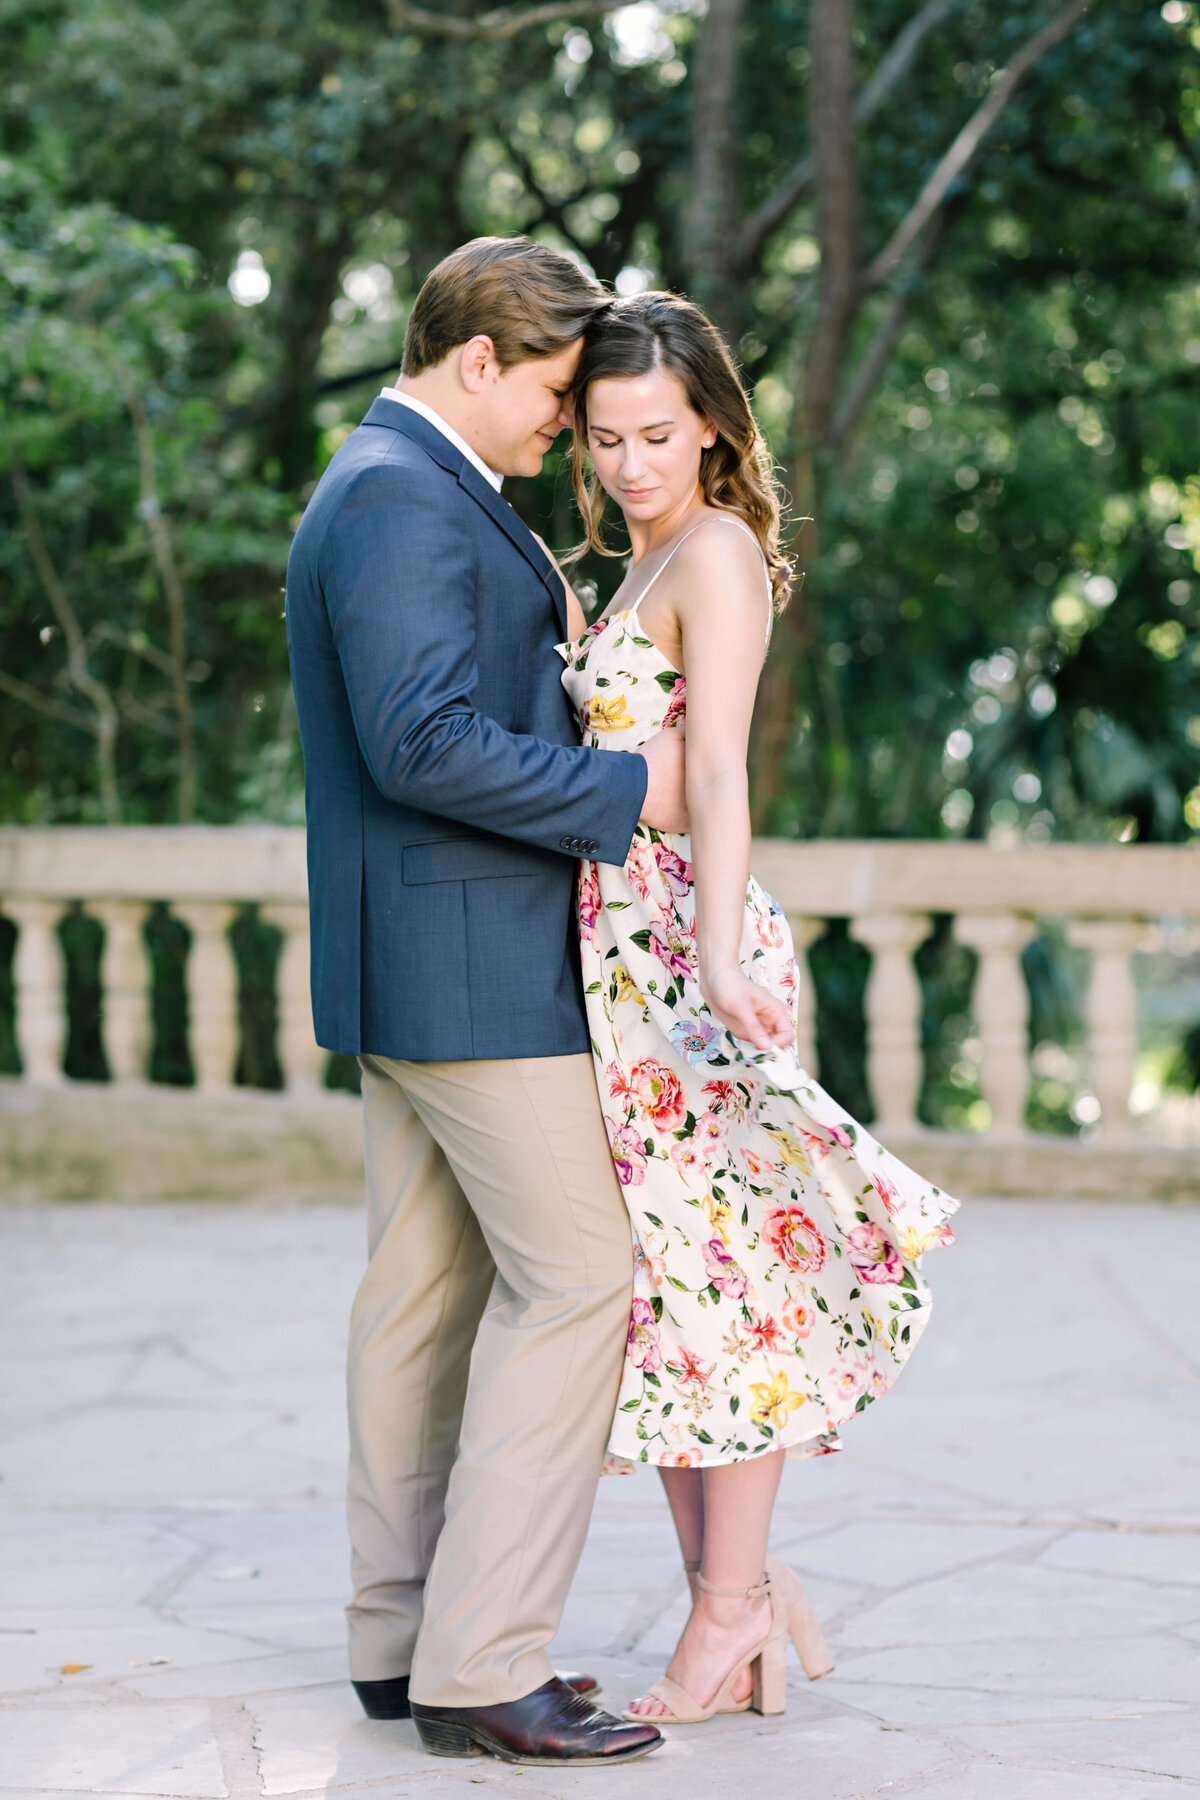 Floral dress for an engagement session